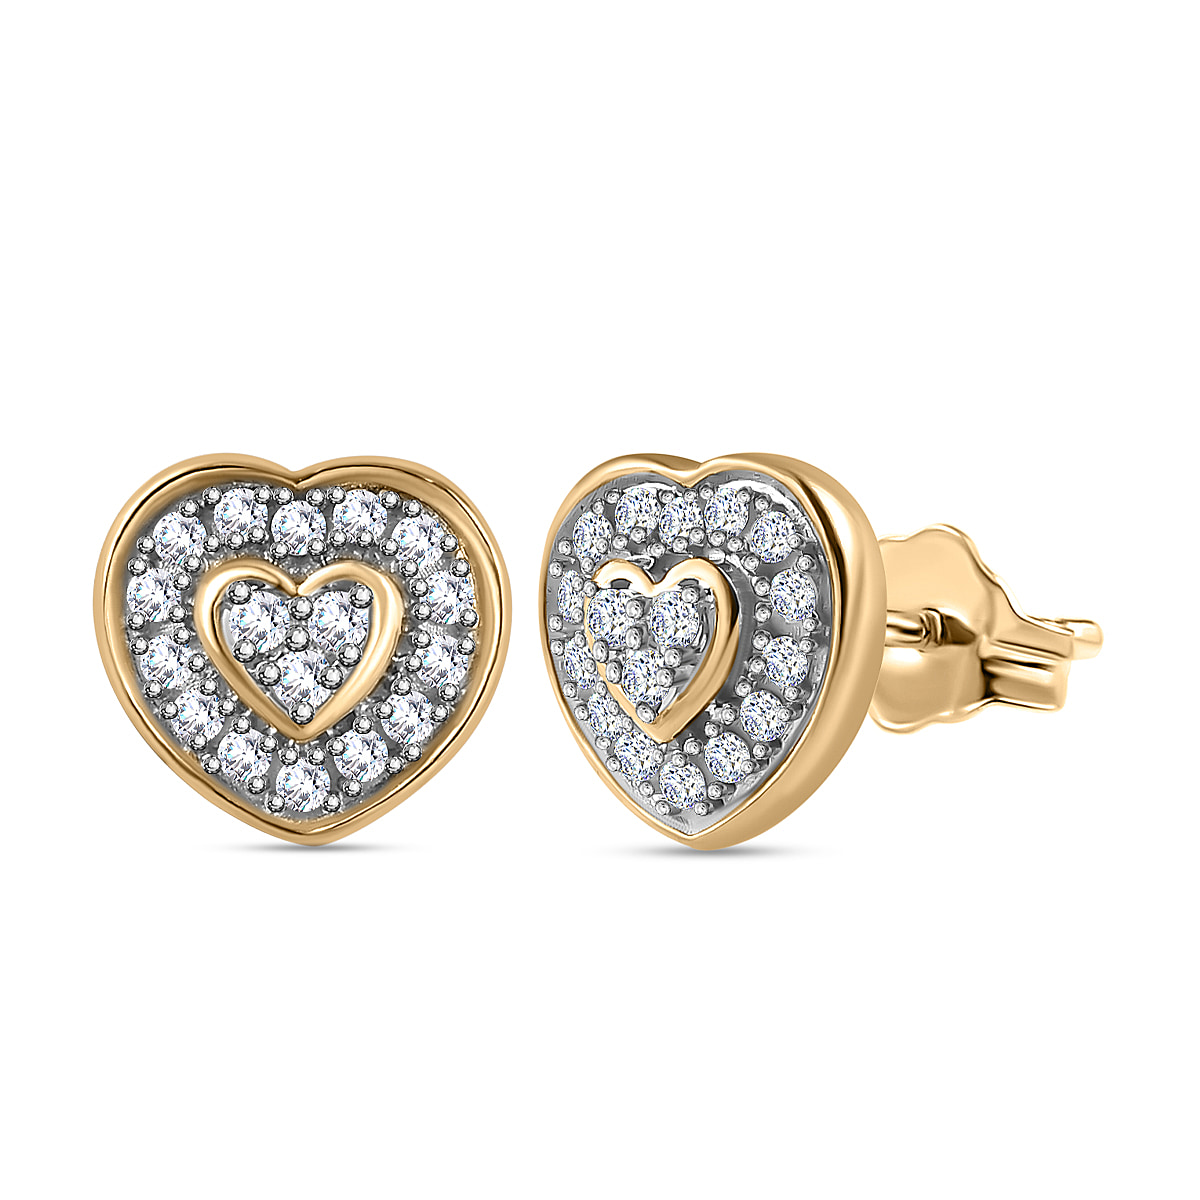 TLV Your Choice - 9K Yellow Gold Natural White Diamond Earrings 0.20 Ct - Heart.